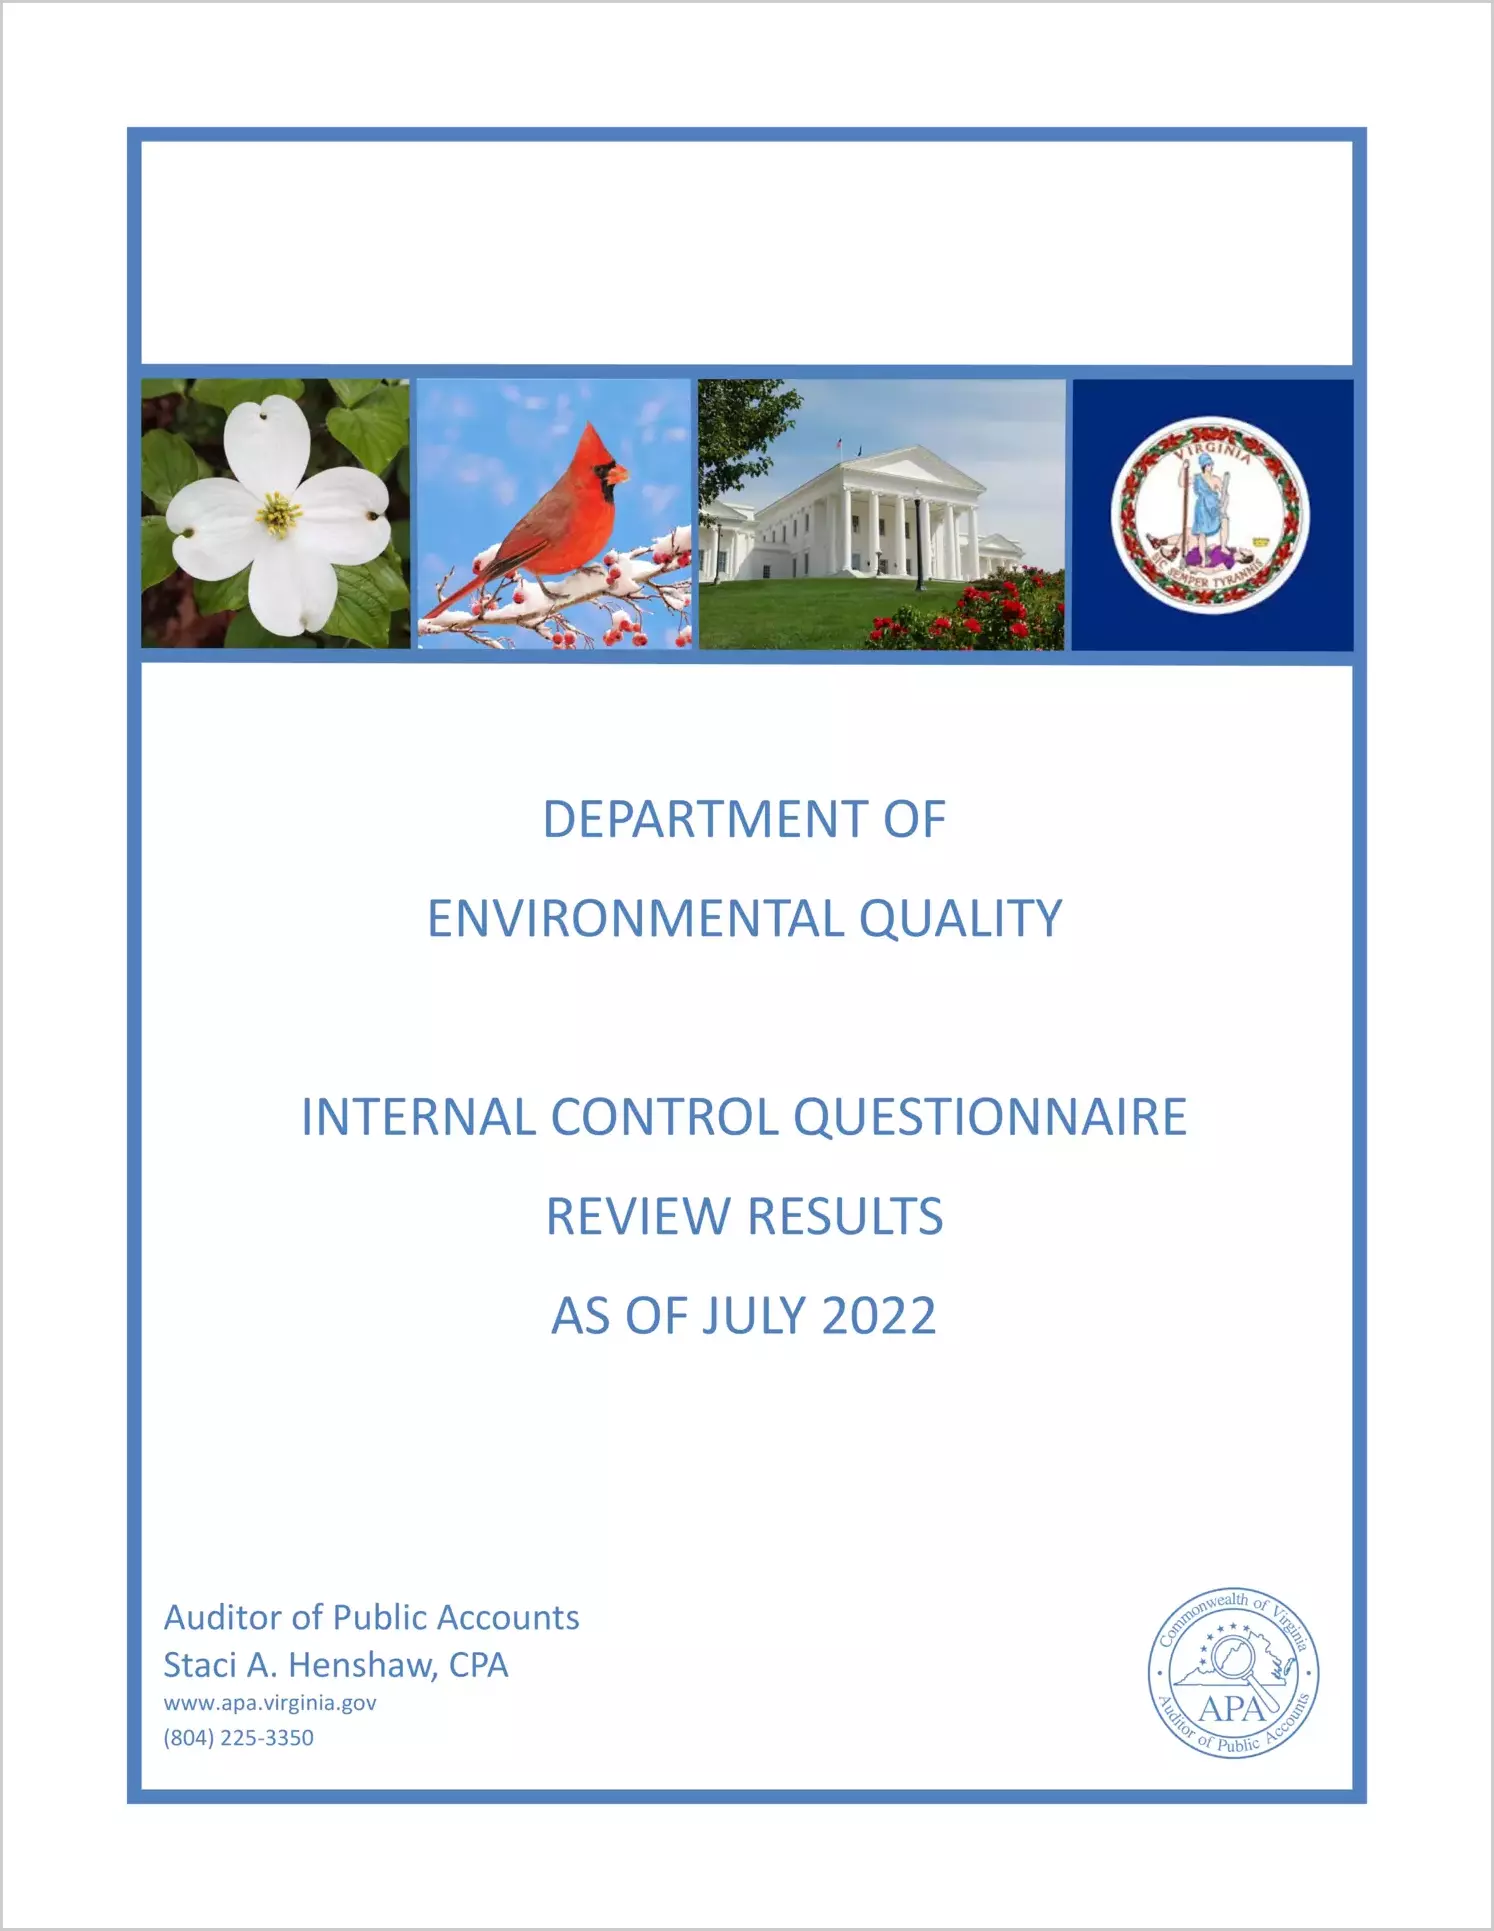 Department of Environmental Quality Internal Control Questionnaire Review Results as of July 2022